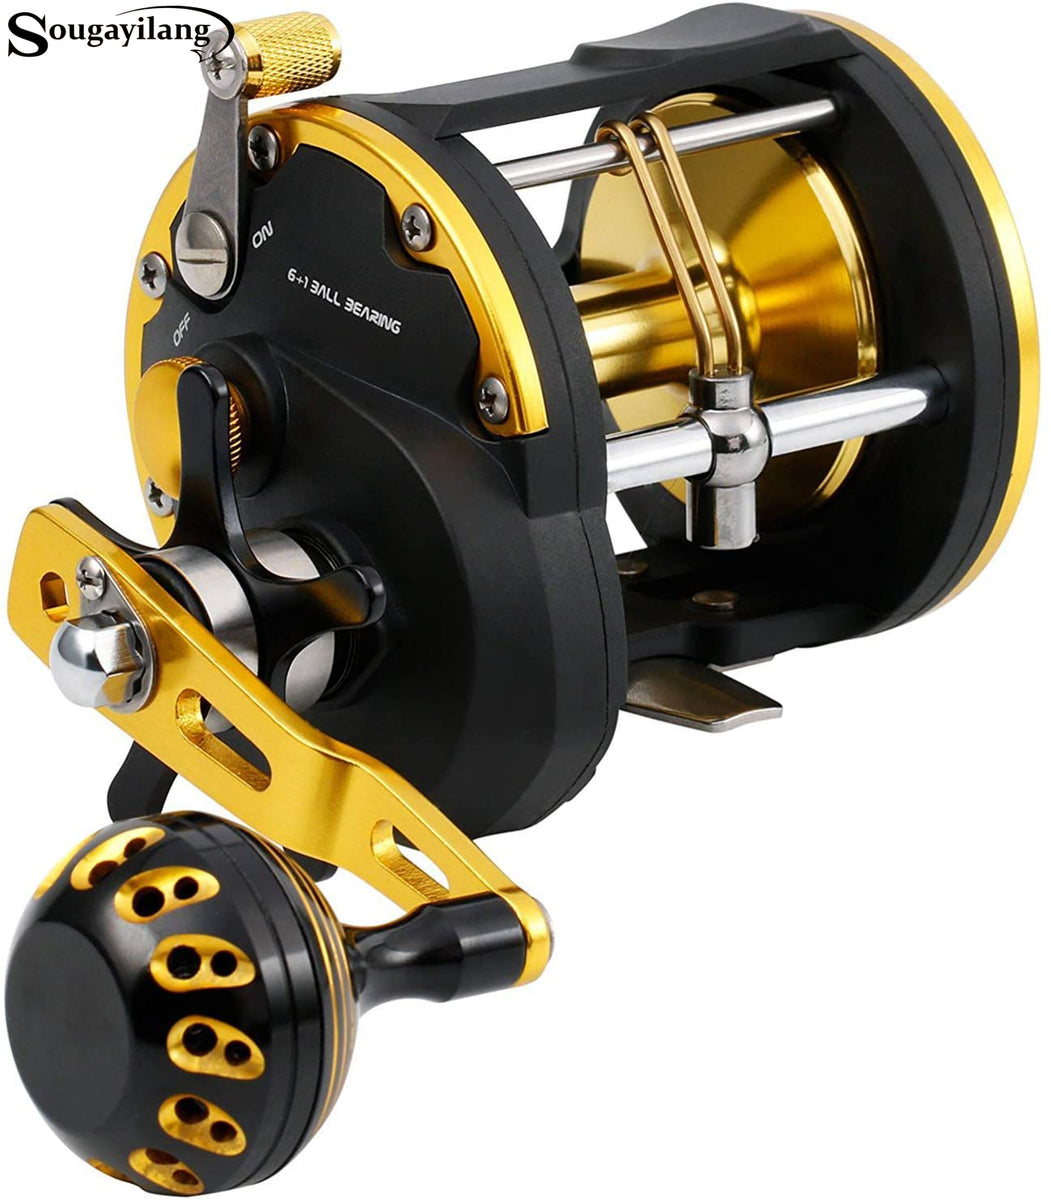 Spring Park 6+1 Ball Level Wind Trolling Reel with Line Counter Saltwater Boat Fishing Reels, Gold